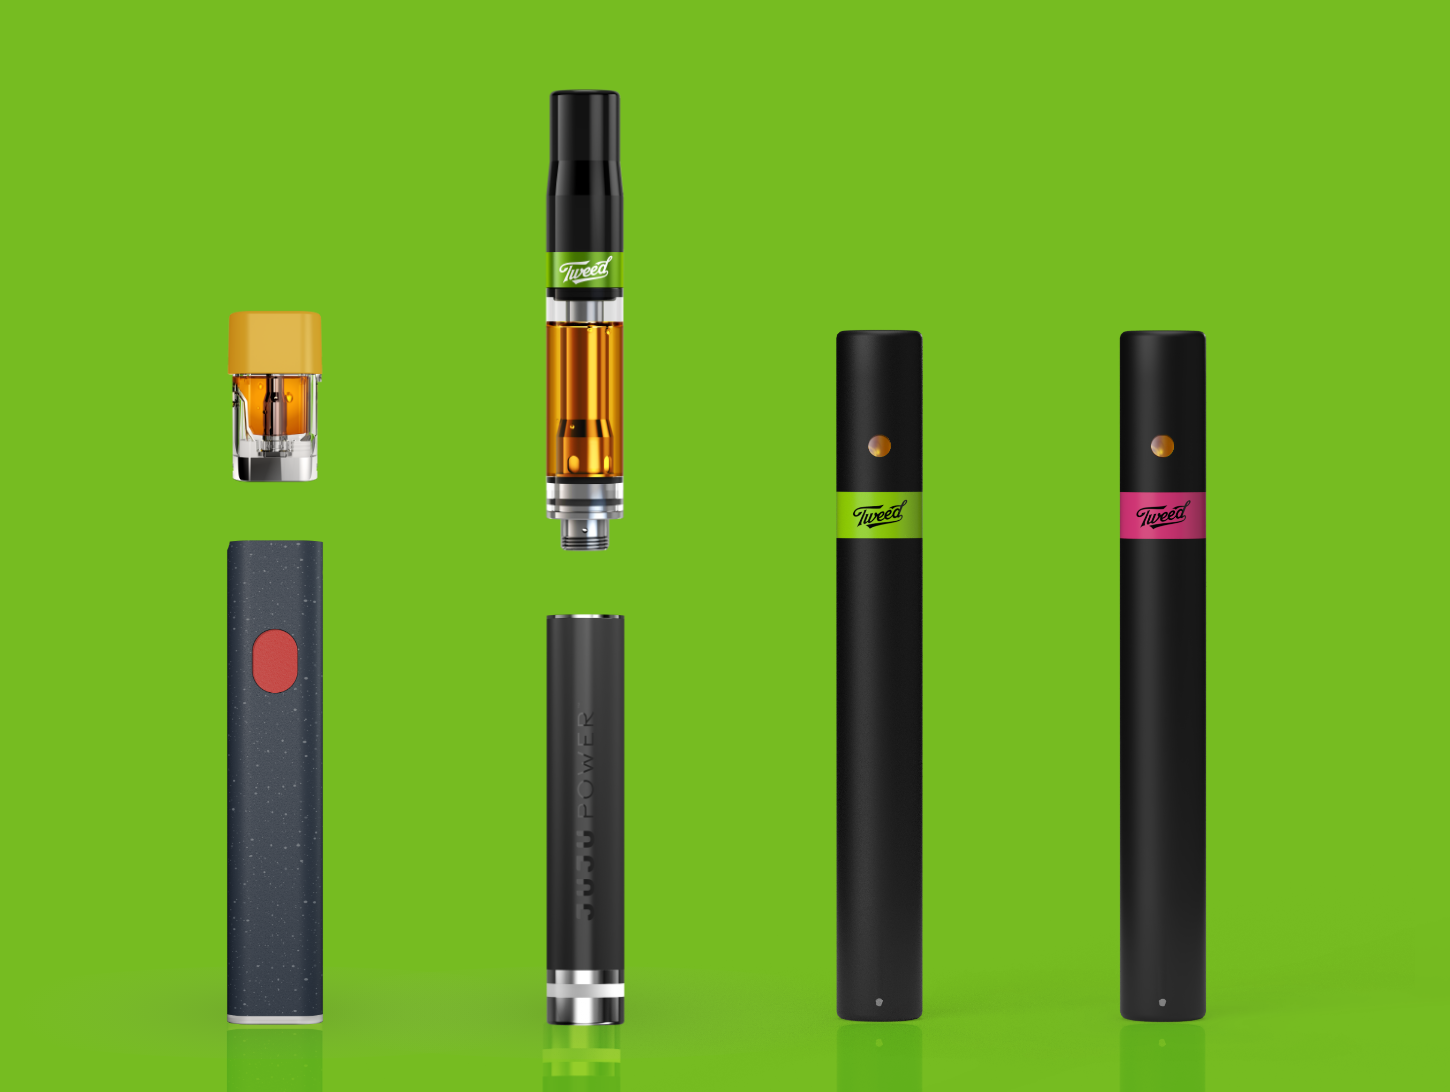 Are There Recommended Times or Situations for Using THC Carts to Enhance Overall Well-Being?